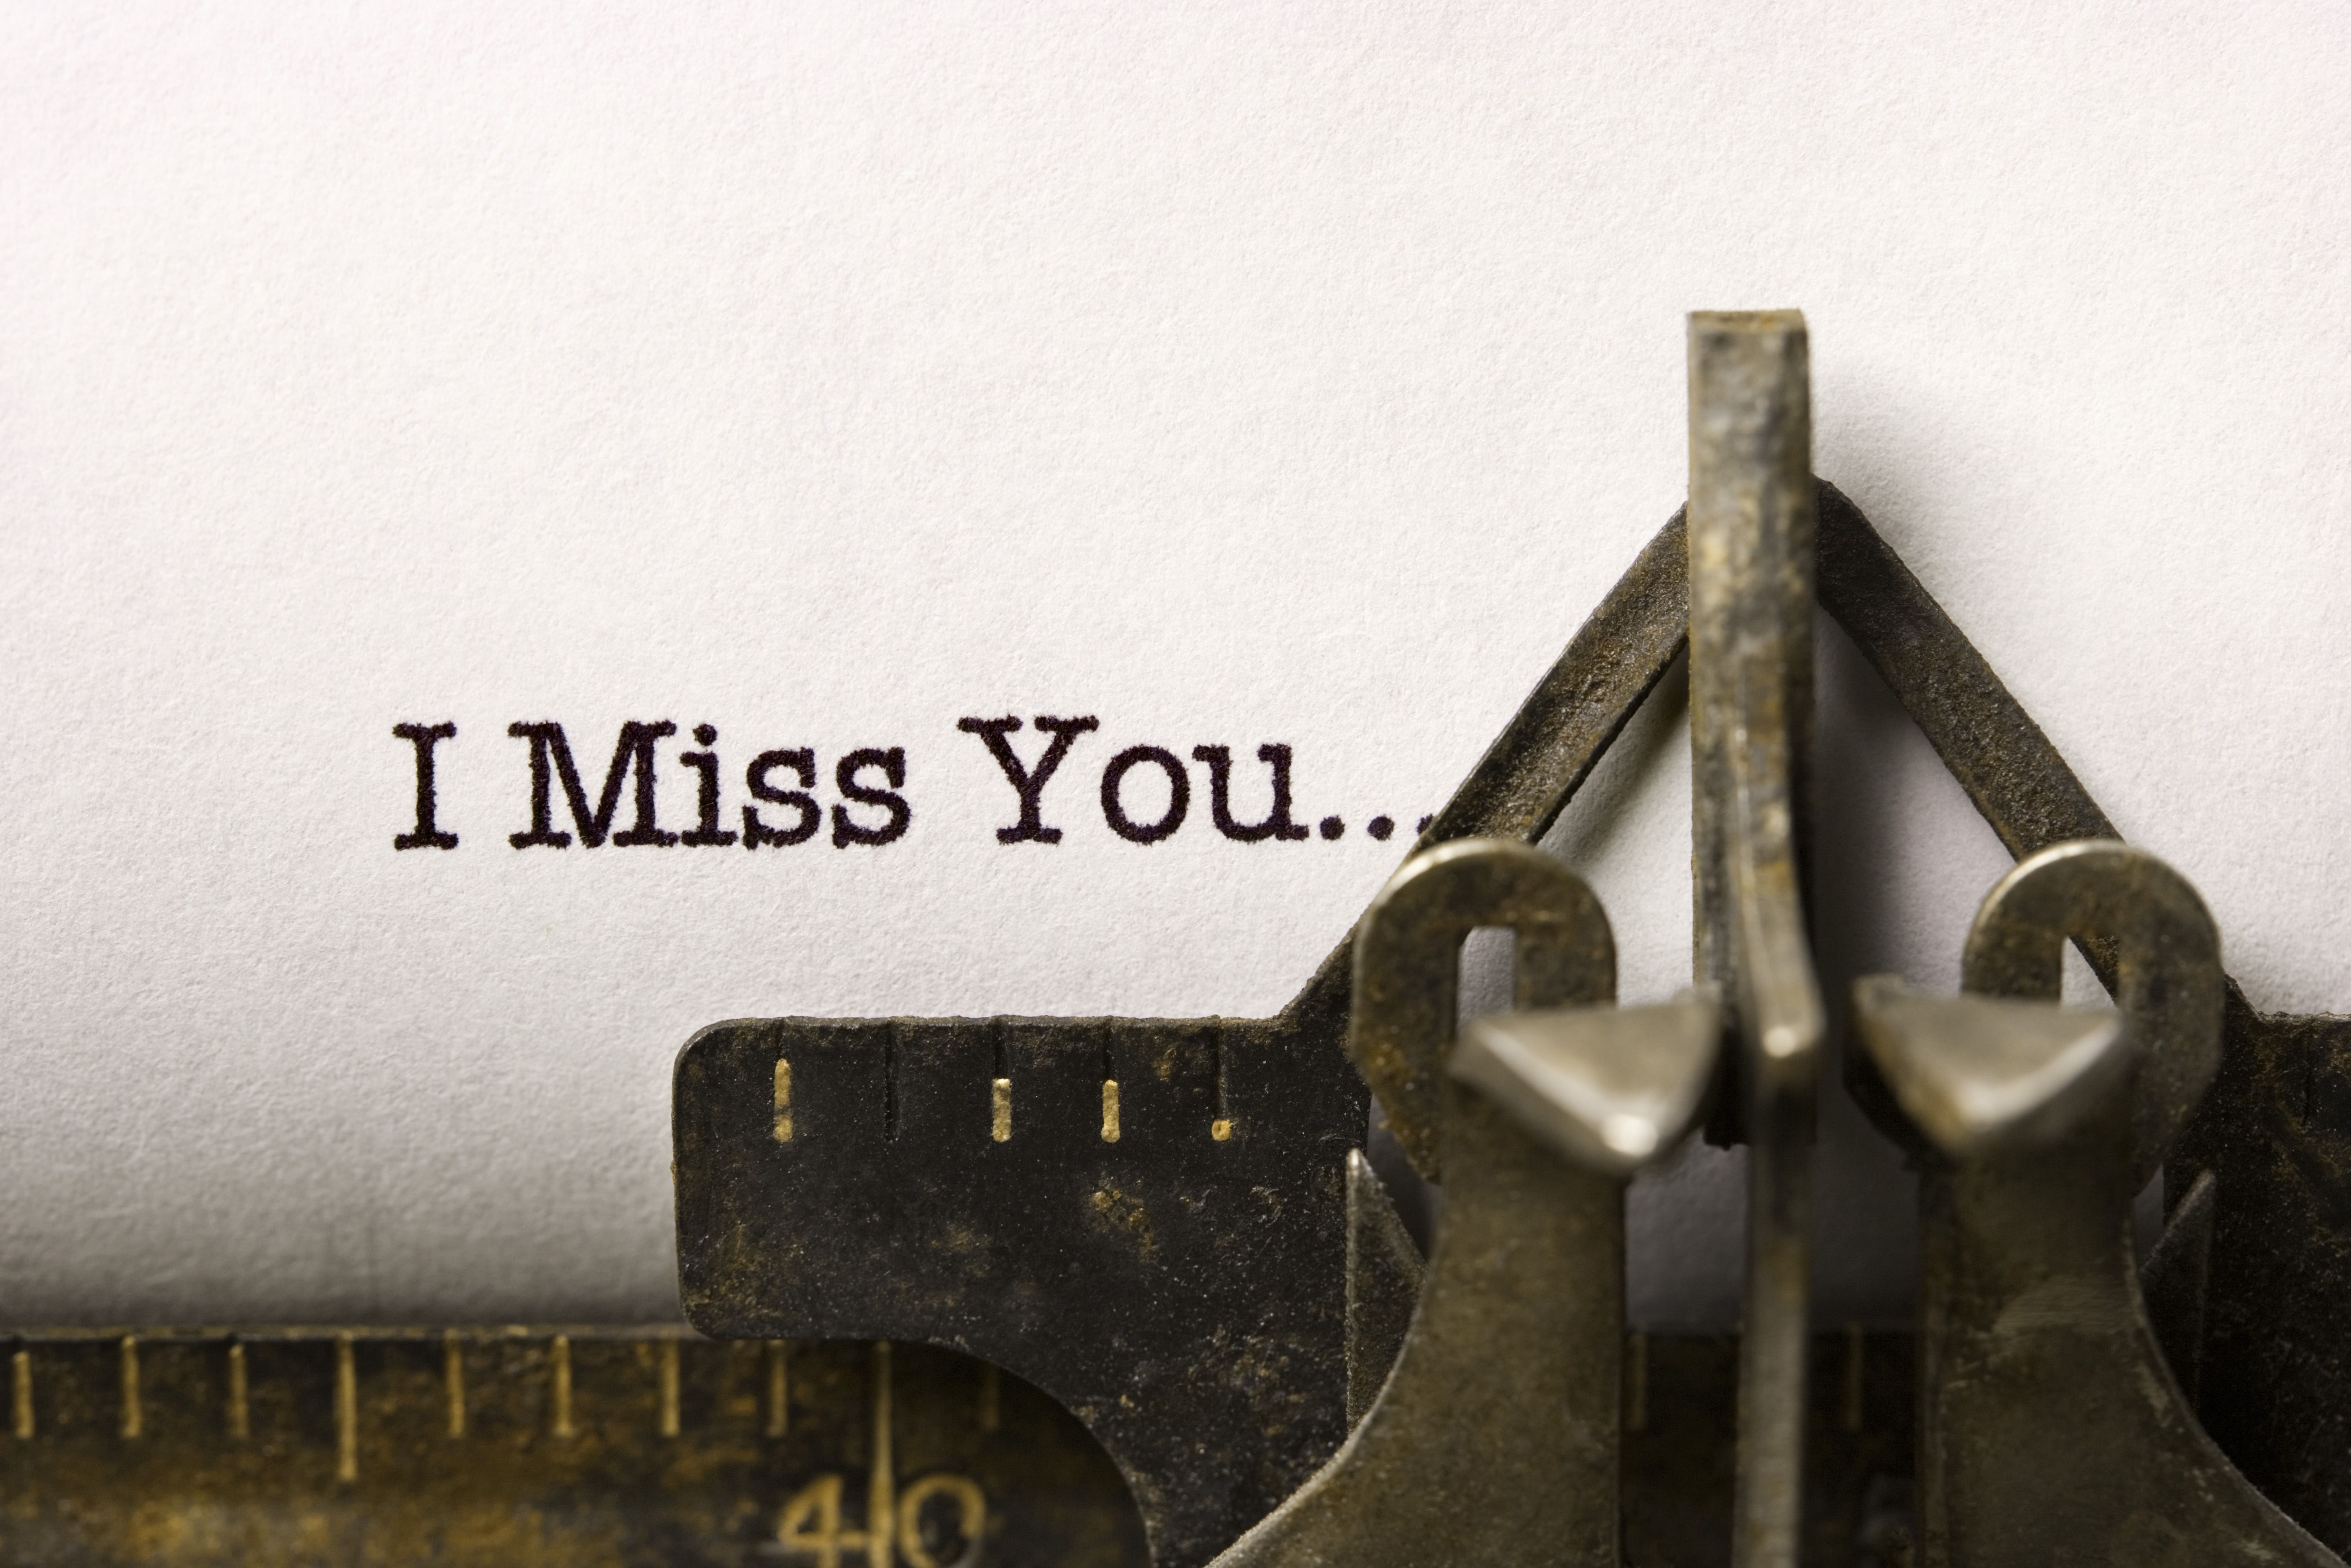 30 I Miss You Quotes Missing You Quotes